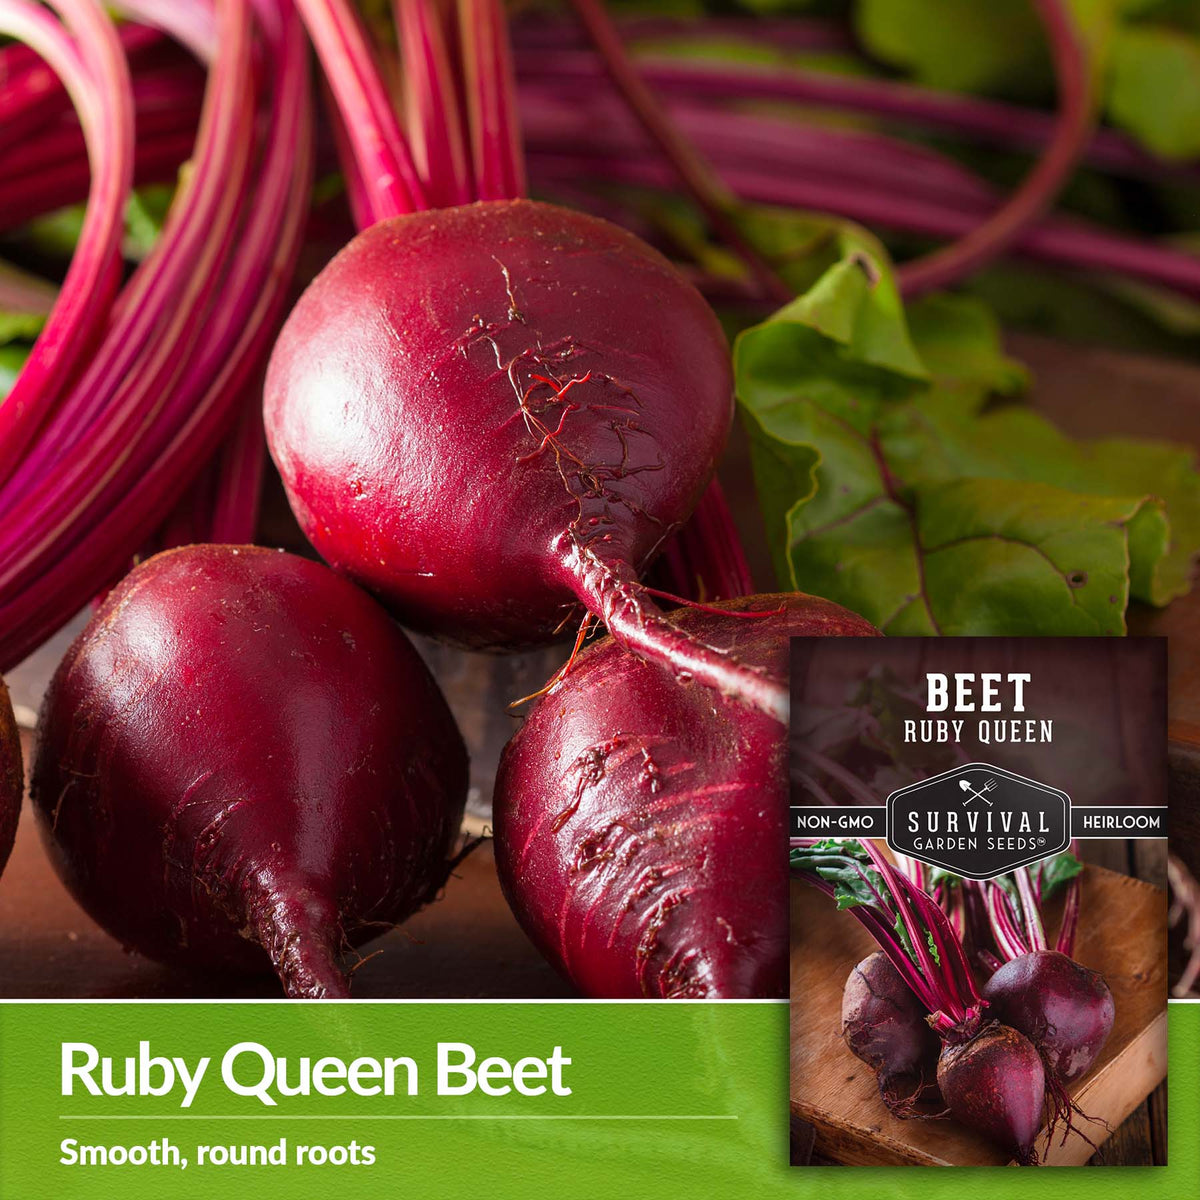 Ruby Queen Beets have smooth round roots